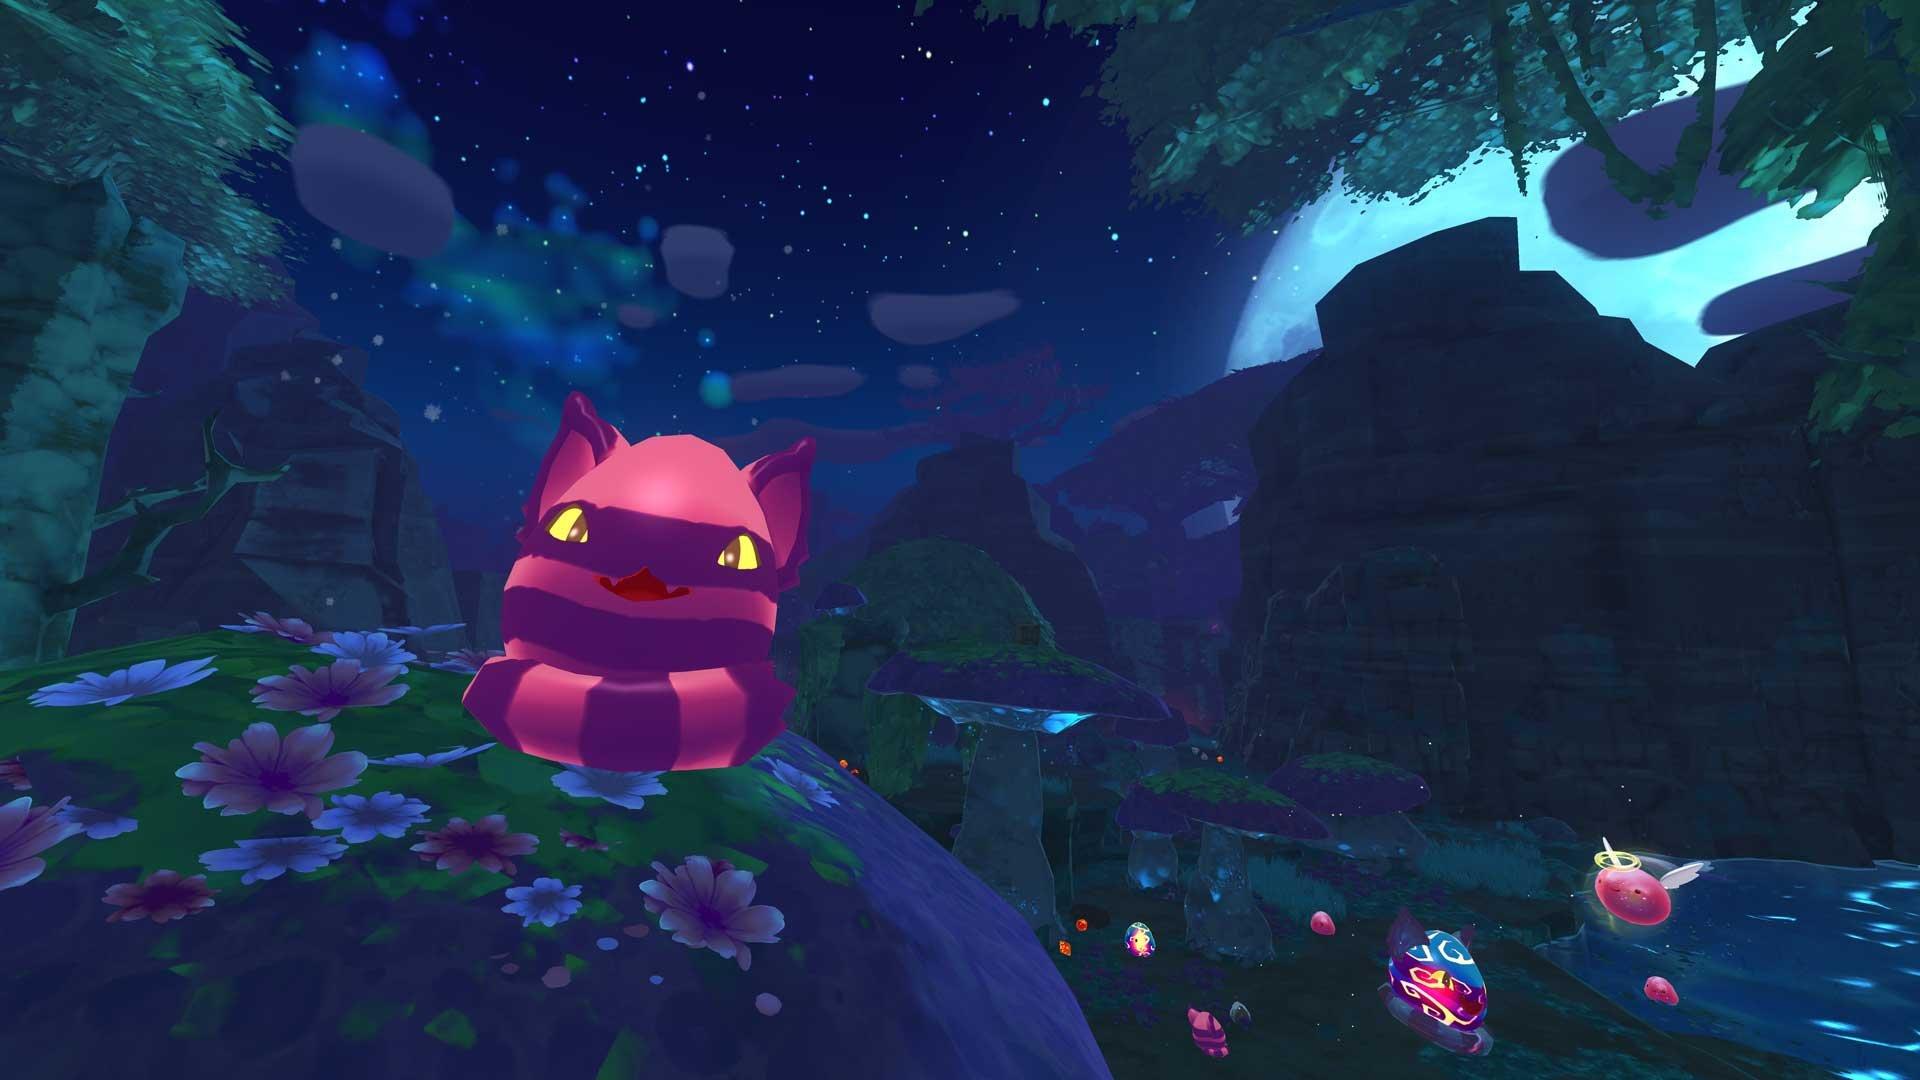 Slime Rancher: Secret Style Pack on PS4 — price history